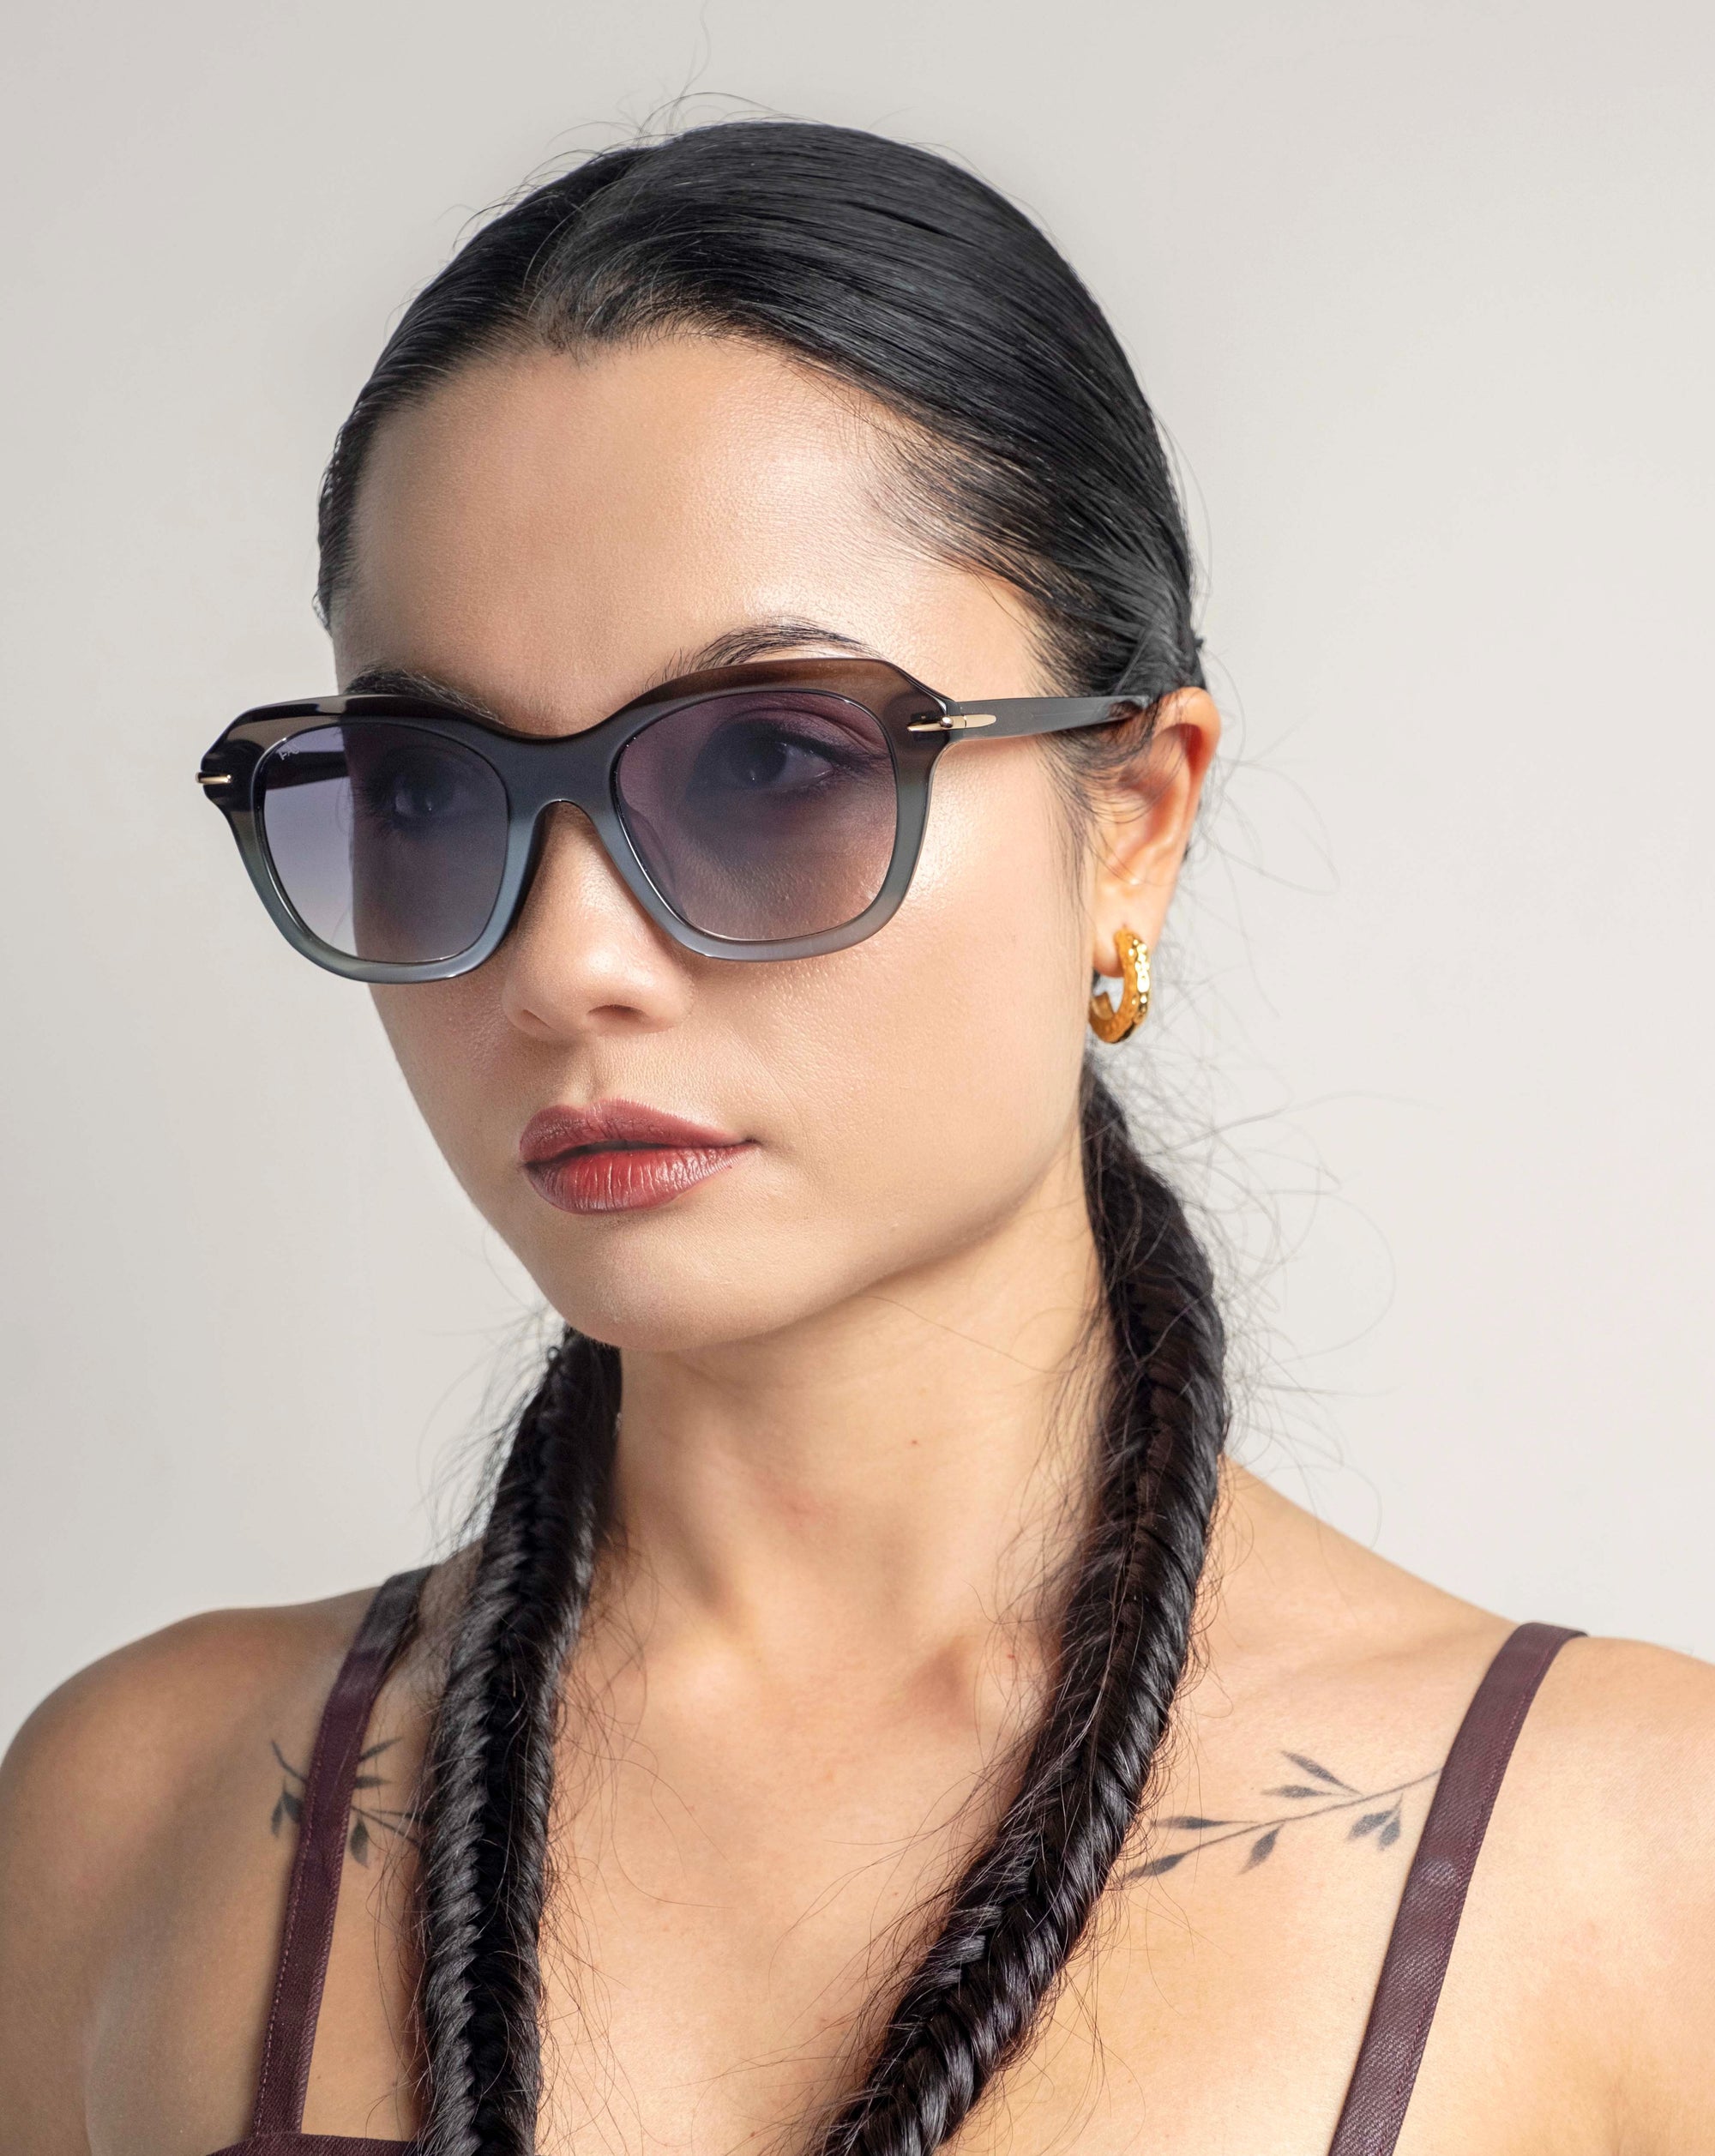 A woman with long dark hair styled in two side braids wears oversized cat-eye Helene sunglasses by For Art's Sake®. She has a neutral facial expression, minimal makeup, and small hoop earrings. Her shoulder tattoos are partially visible. The background is plain and light-colored.